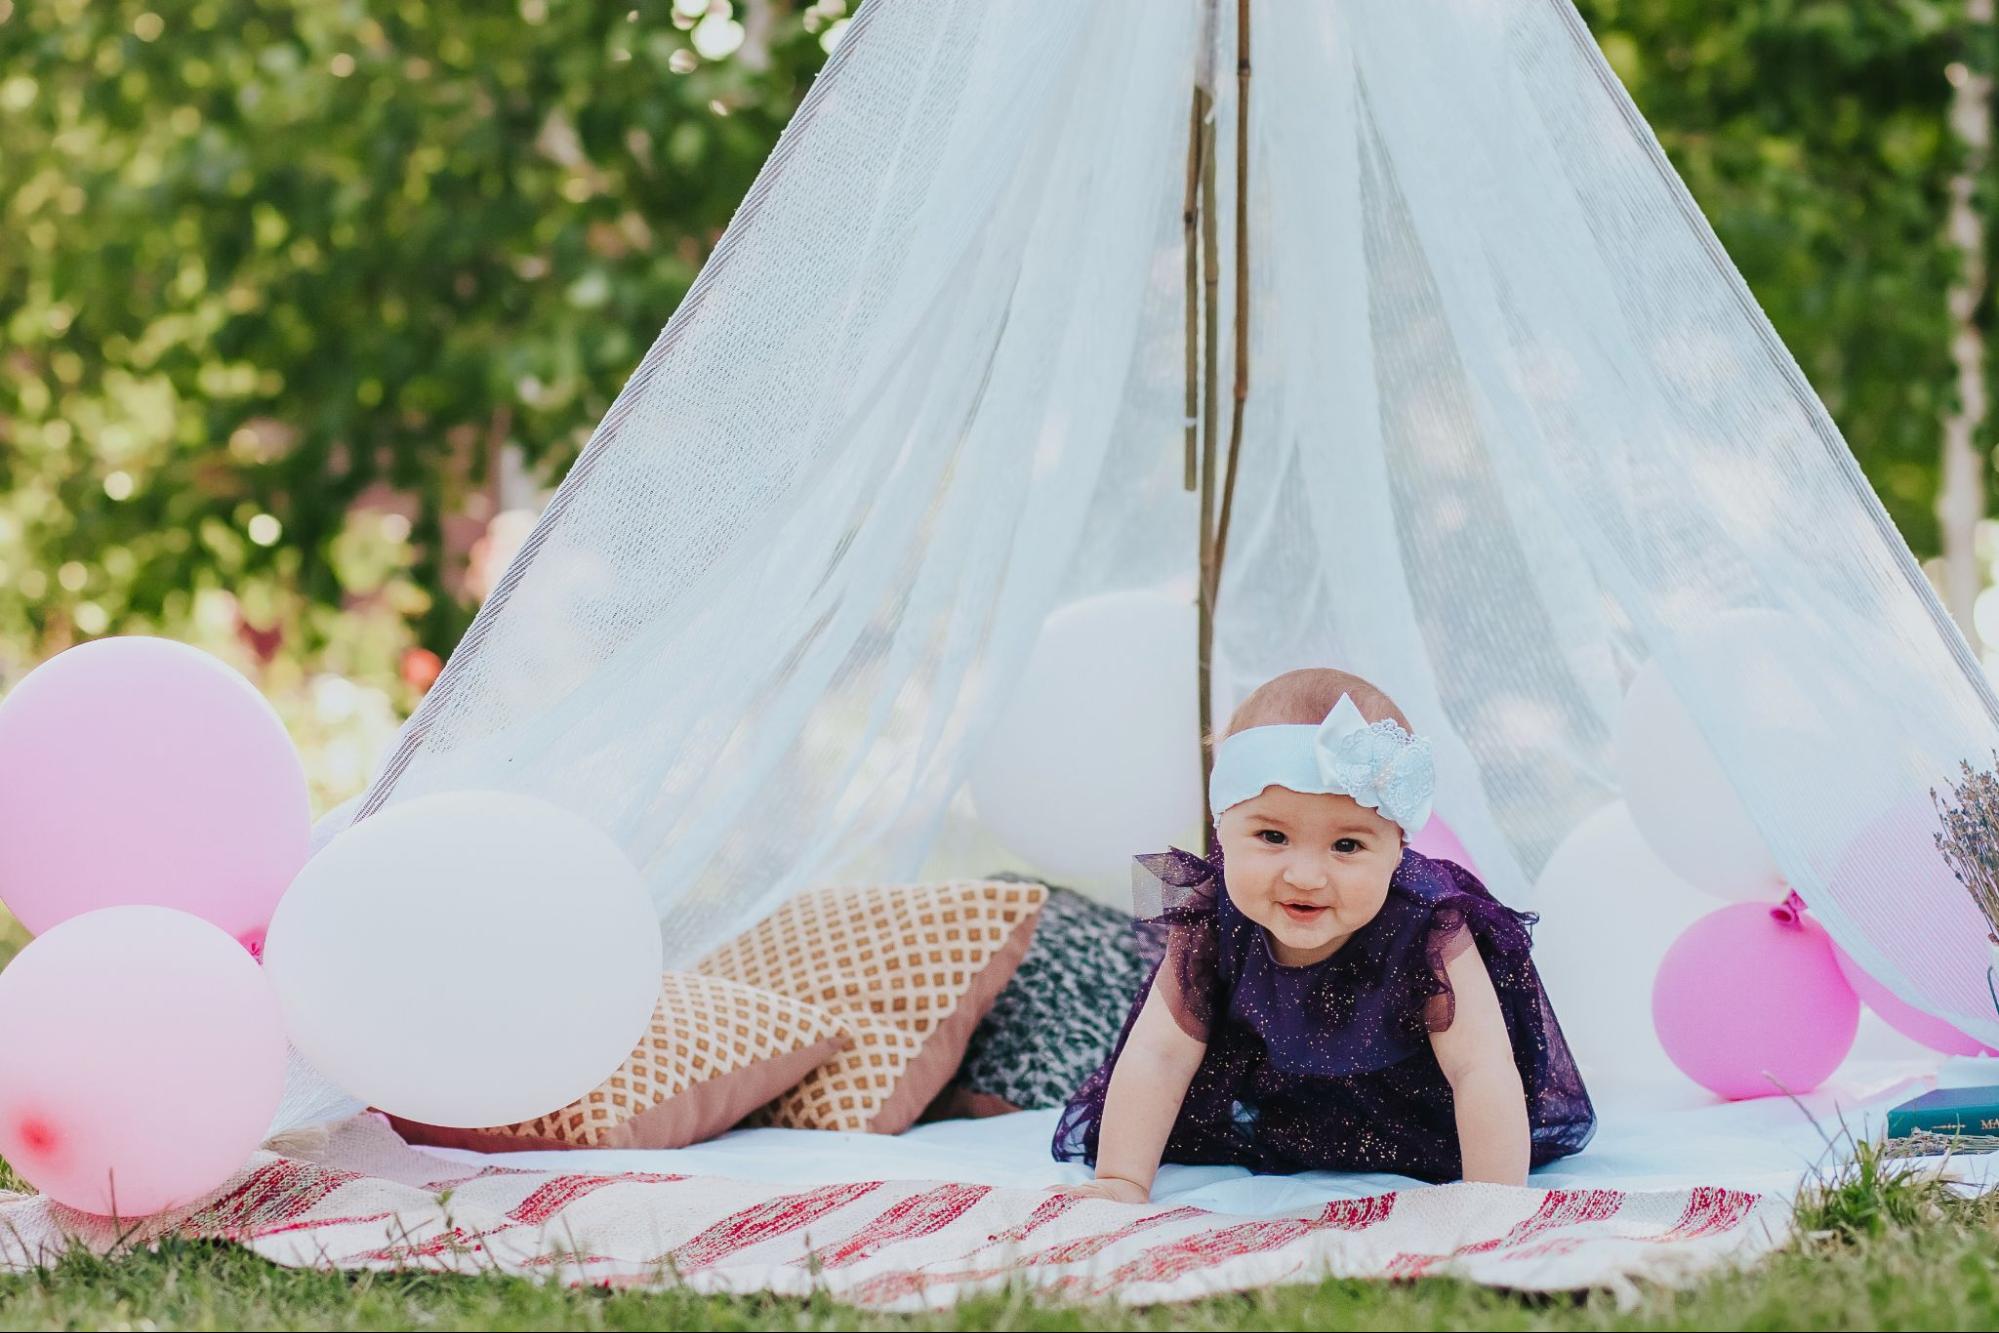 -Baby in tent, adventure awaits, capturing curiosity and imagination.